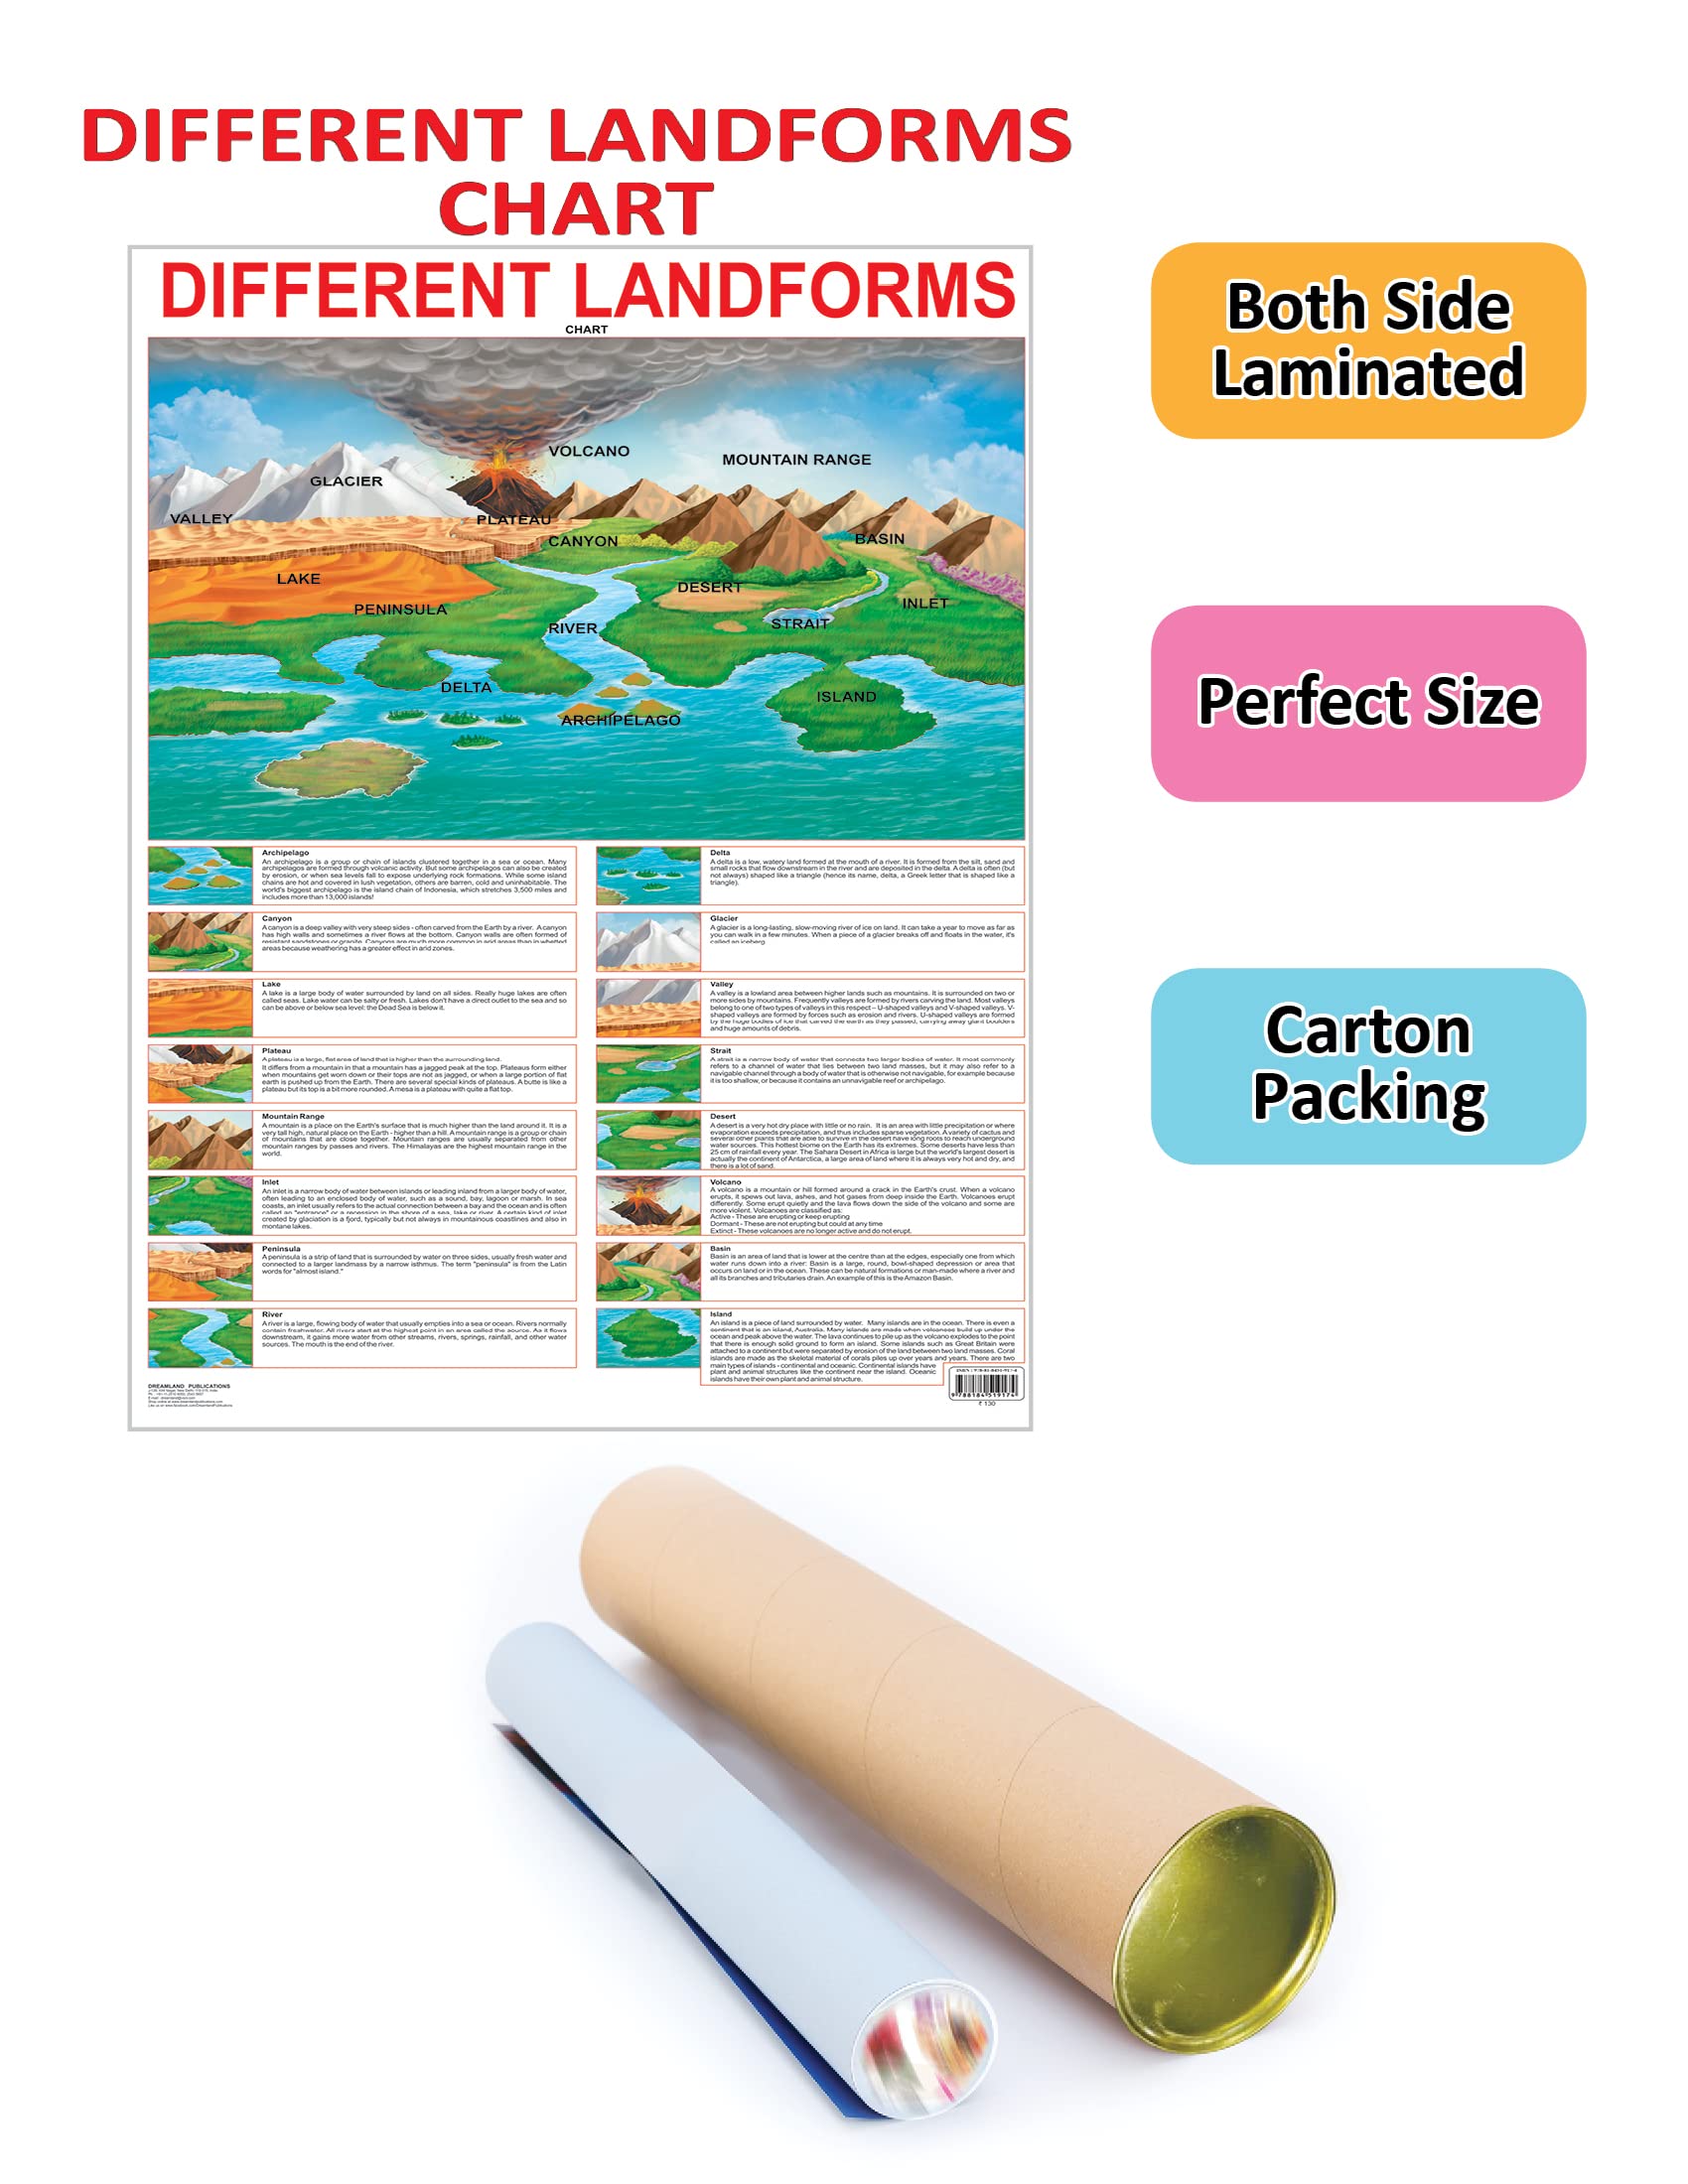 Buy Dreamland Publications Educational Chart Price Online for Land Best | at Distacart - Different Kids Forms